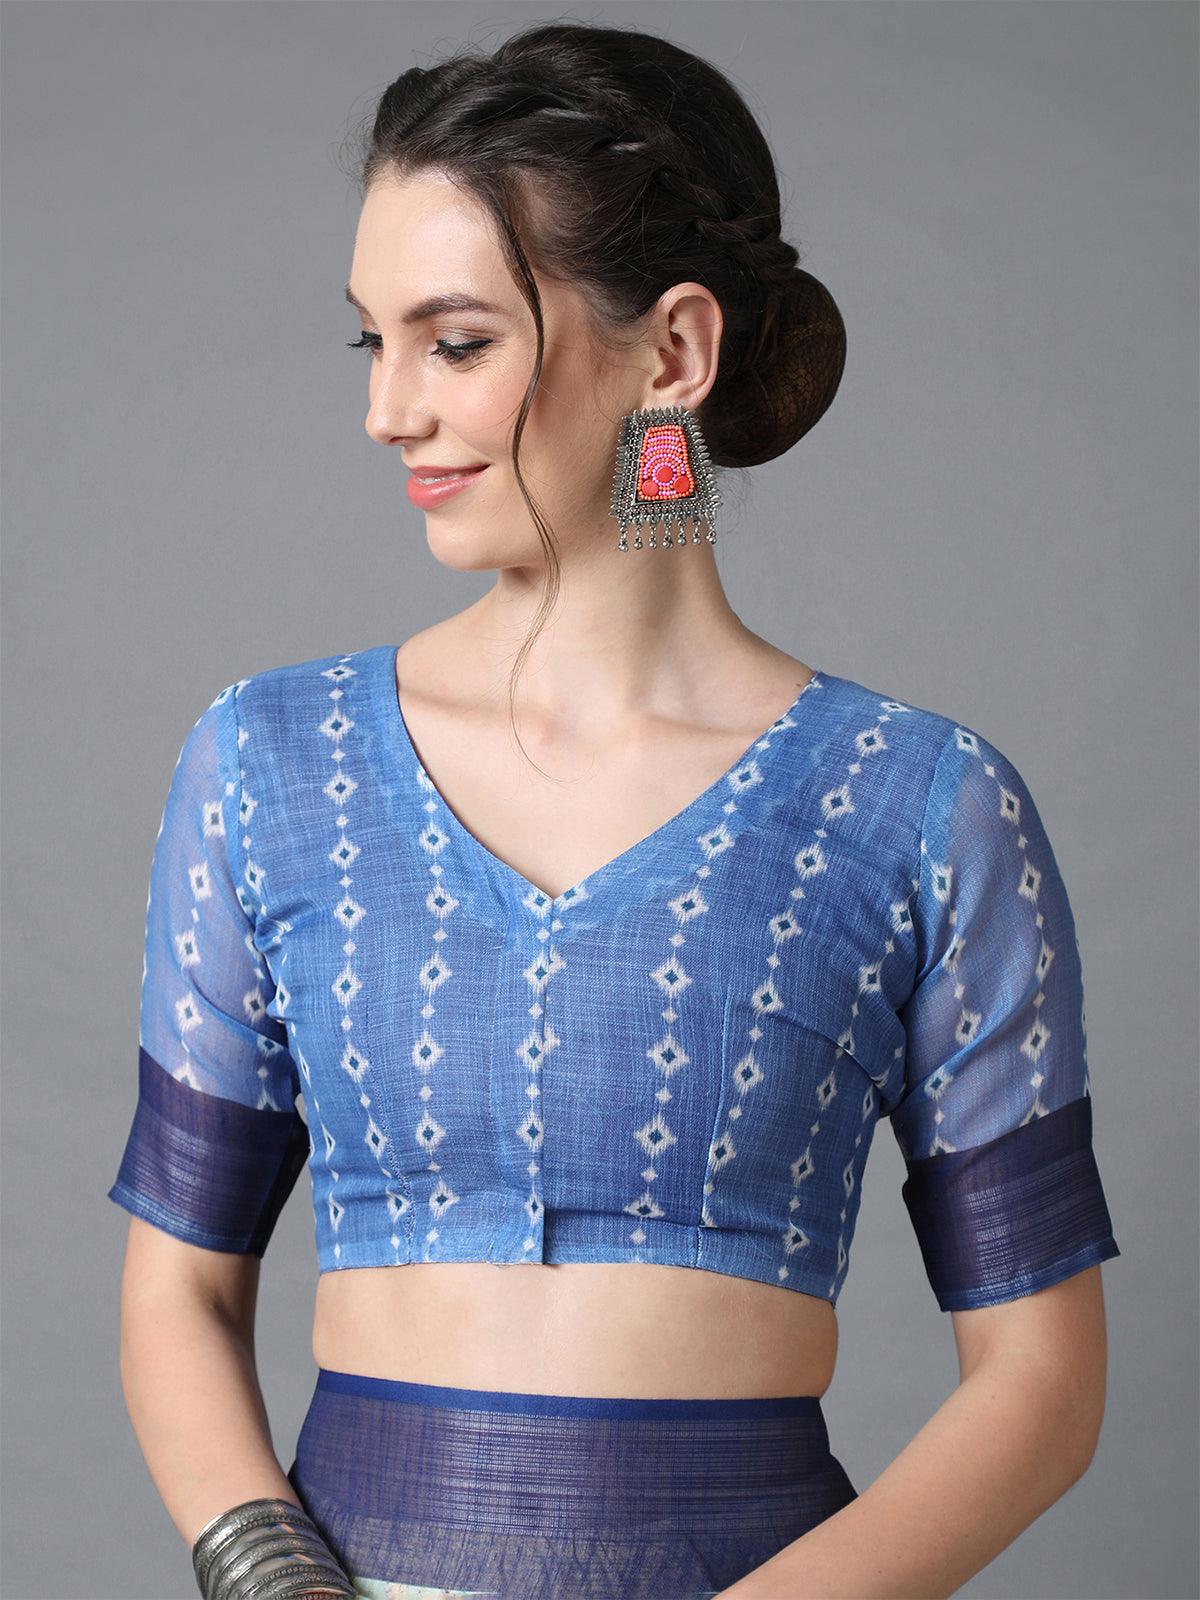 Women's Blue Casual Linen Printed Saree With Unstitched Blouse - Odette